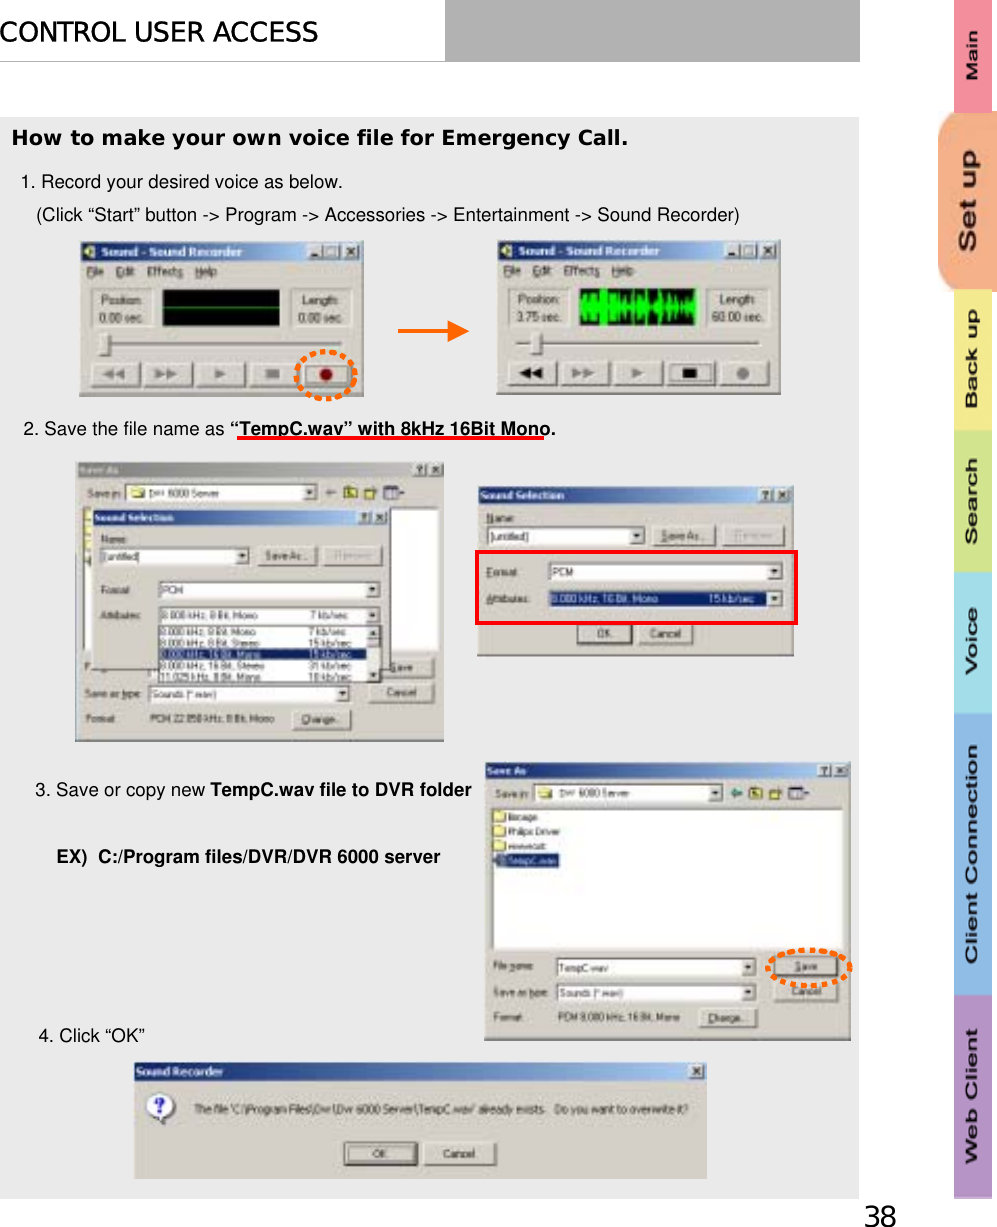 38CONTROL USER ACCESSHow to make your own voice file for Emergency Call.1. Record your desired voice as below.(Click “Start” button -&gt; Program -&gt; Accessories -&gt; Entertainment -&gt; Sound Recorder)2. Save the file name as “TempC.wav” with 8kHz 16Bit Mono.3. Save or copy new TempC.wav file to DVR folderEX)  C:/Program files/DVR/DVR 6000 server4. Click “OK”